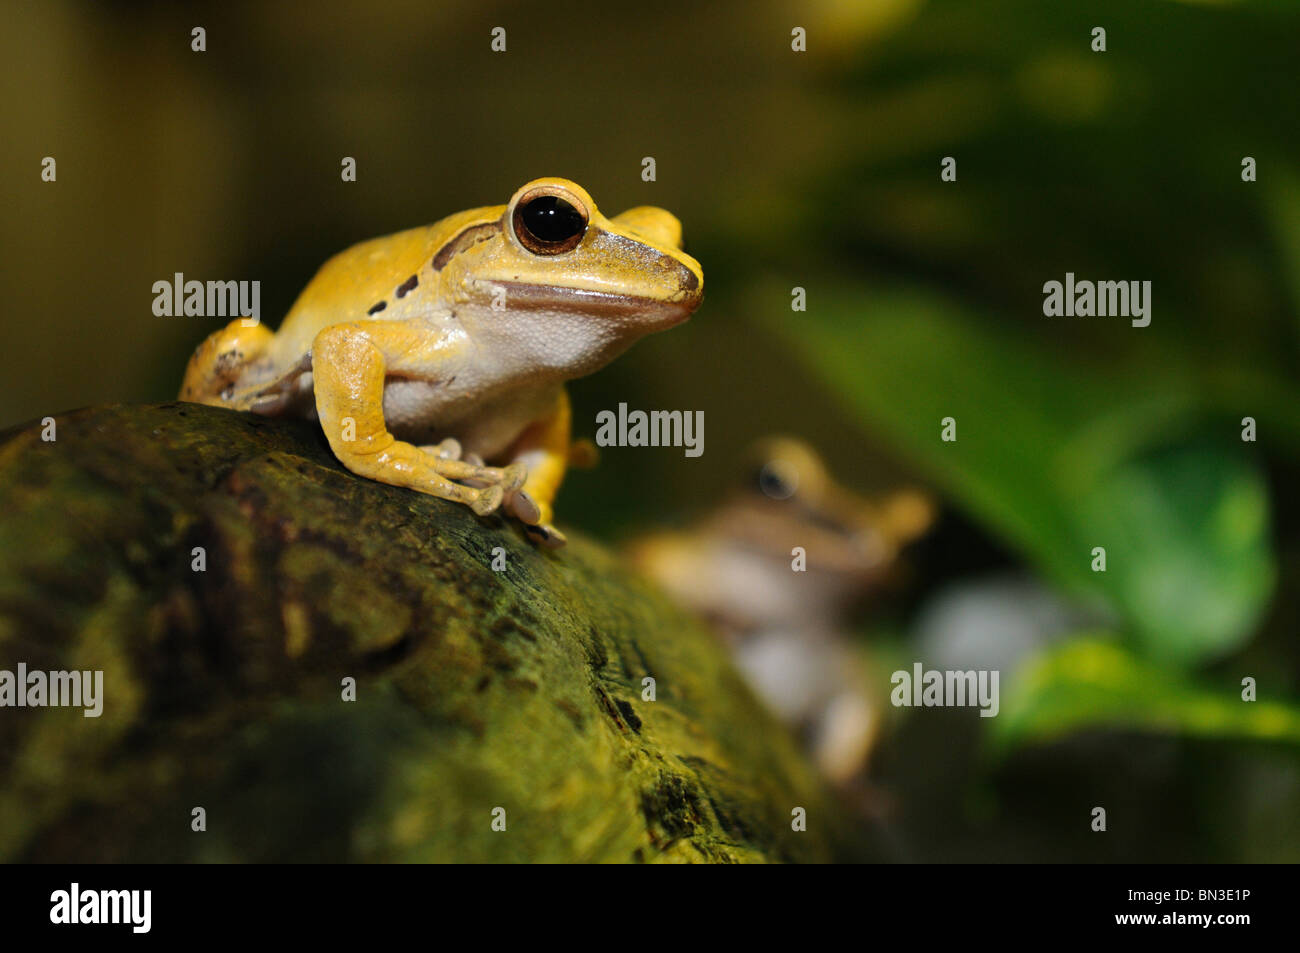 Two Golden Poison Frogs (Phyllobates terribilis) sitting on a stone, close-up Stock Photo